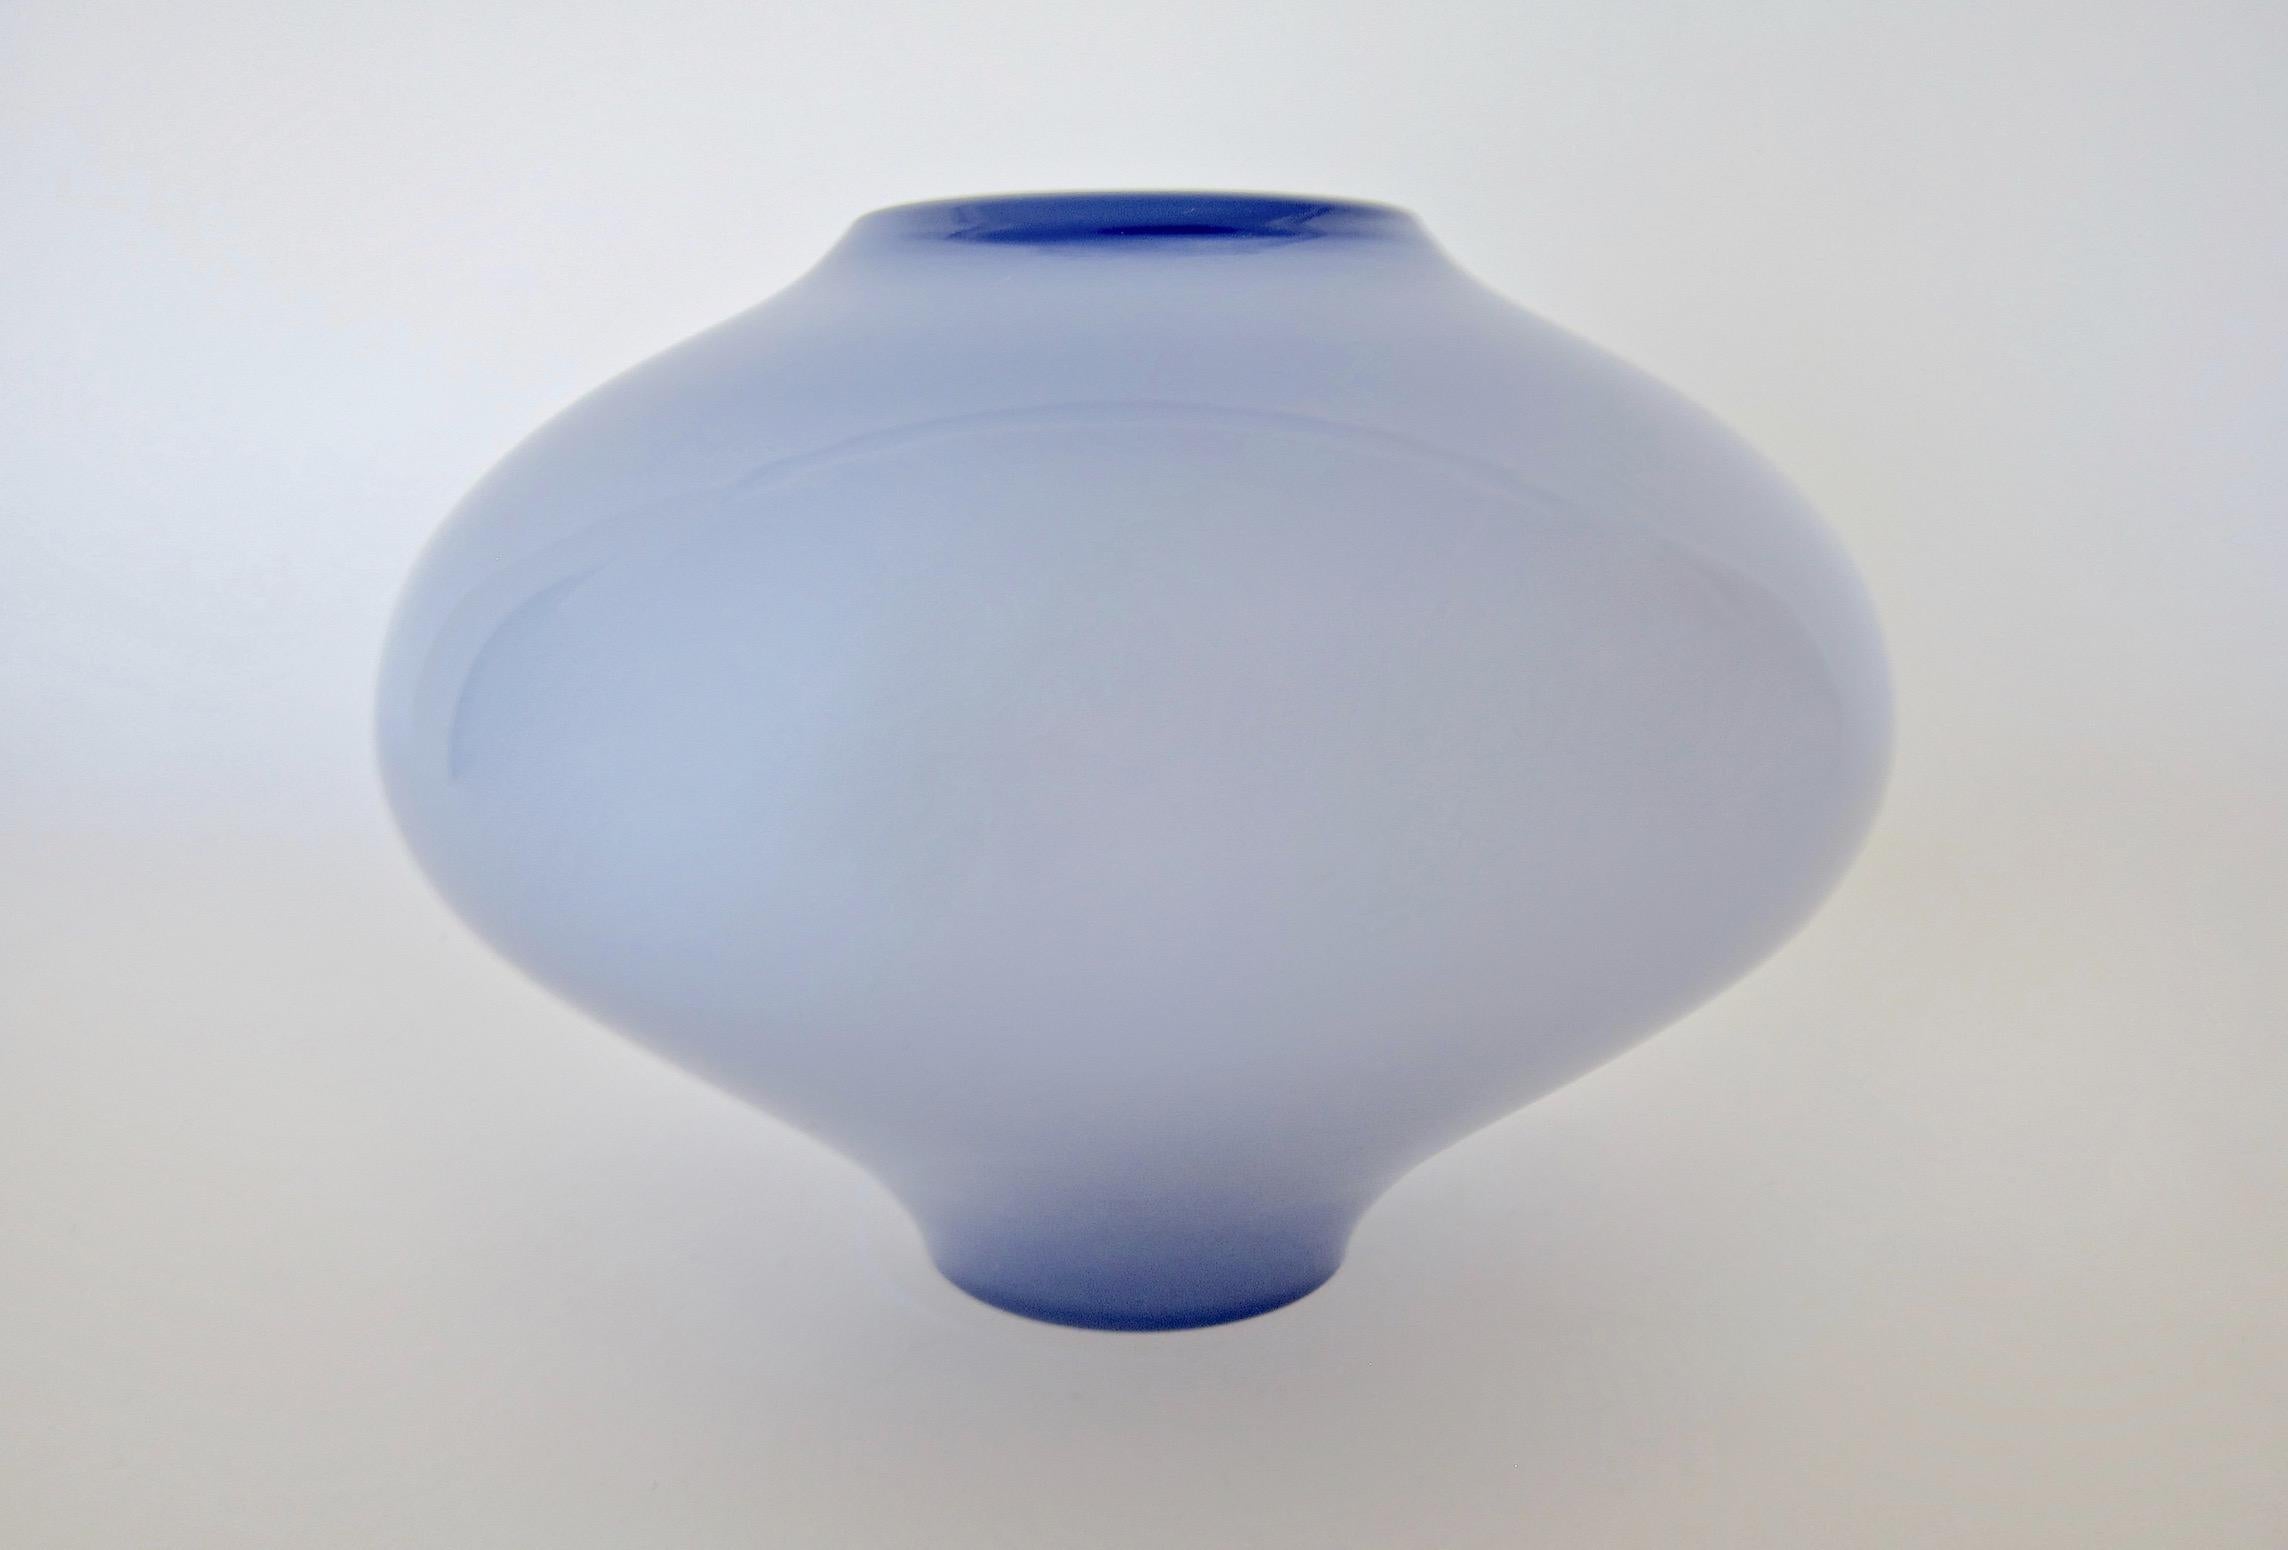 A vintage cased glass vase, blown into a retro shape resembling a UFO. The handcrafted vessel has a layer of lavender glass over a contrasting crisp, bright white interior. The vase is unmarked but likely the work of Carlo Moretti of Murano, Italy.